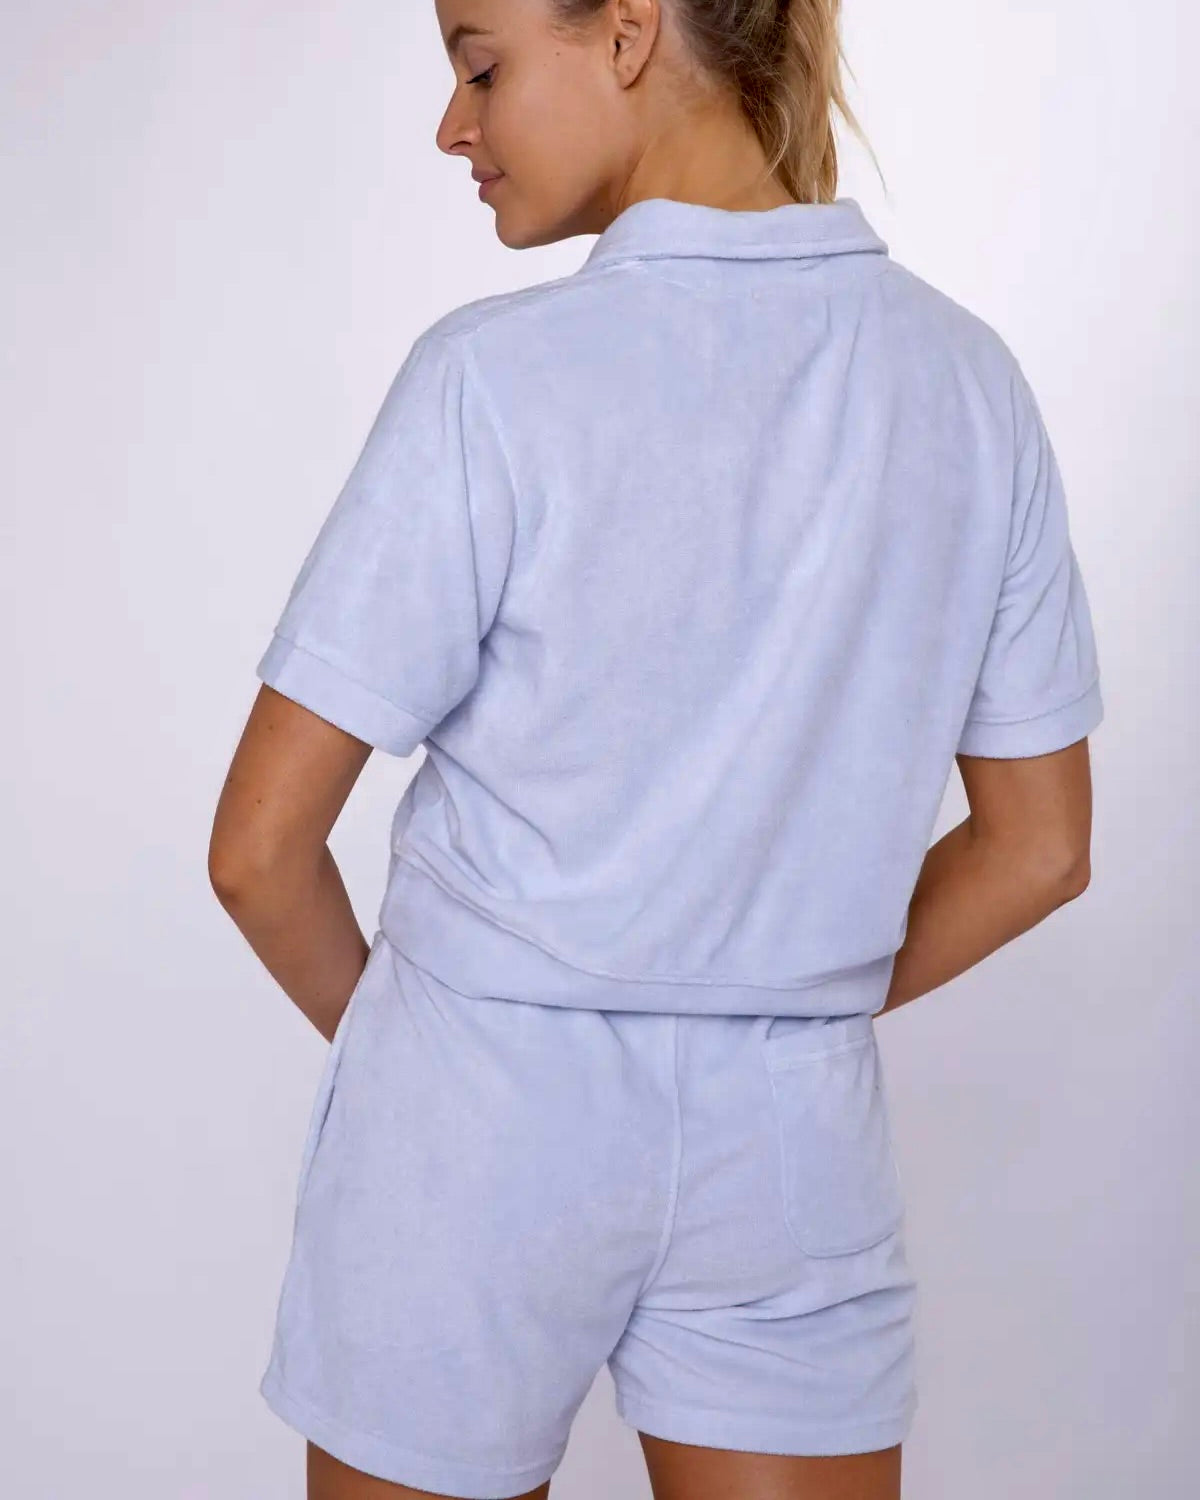 Mono B Brushed Shirt and shorts set in Light Peri color on a white background